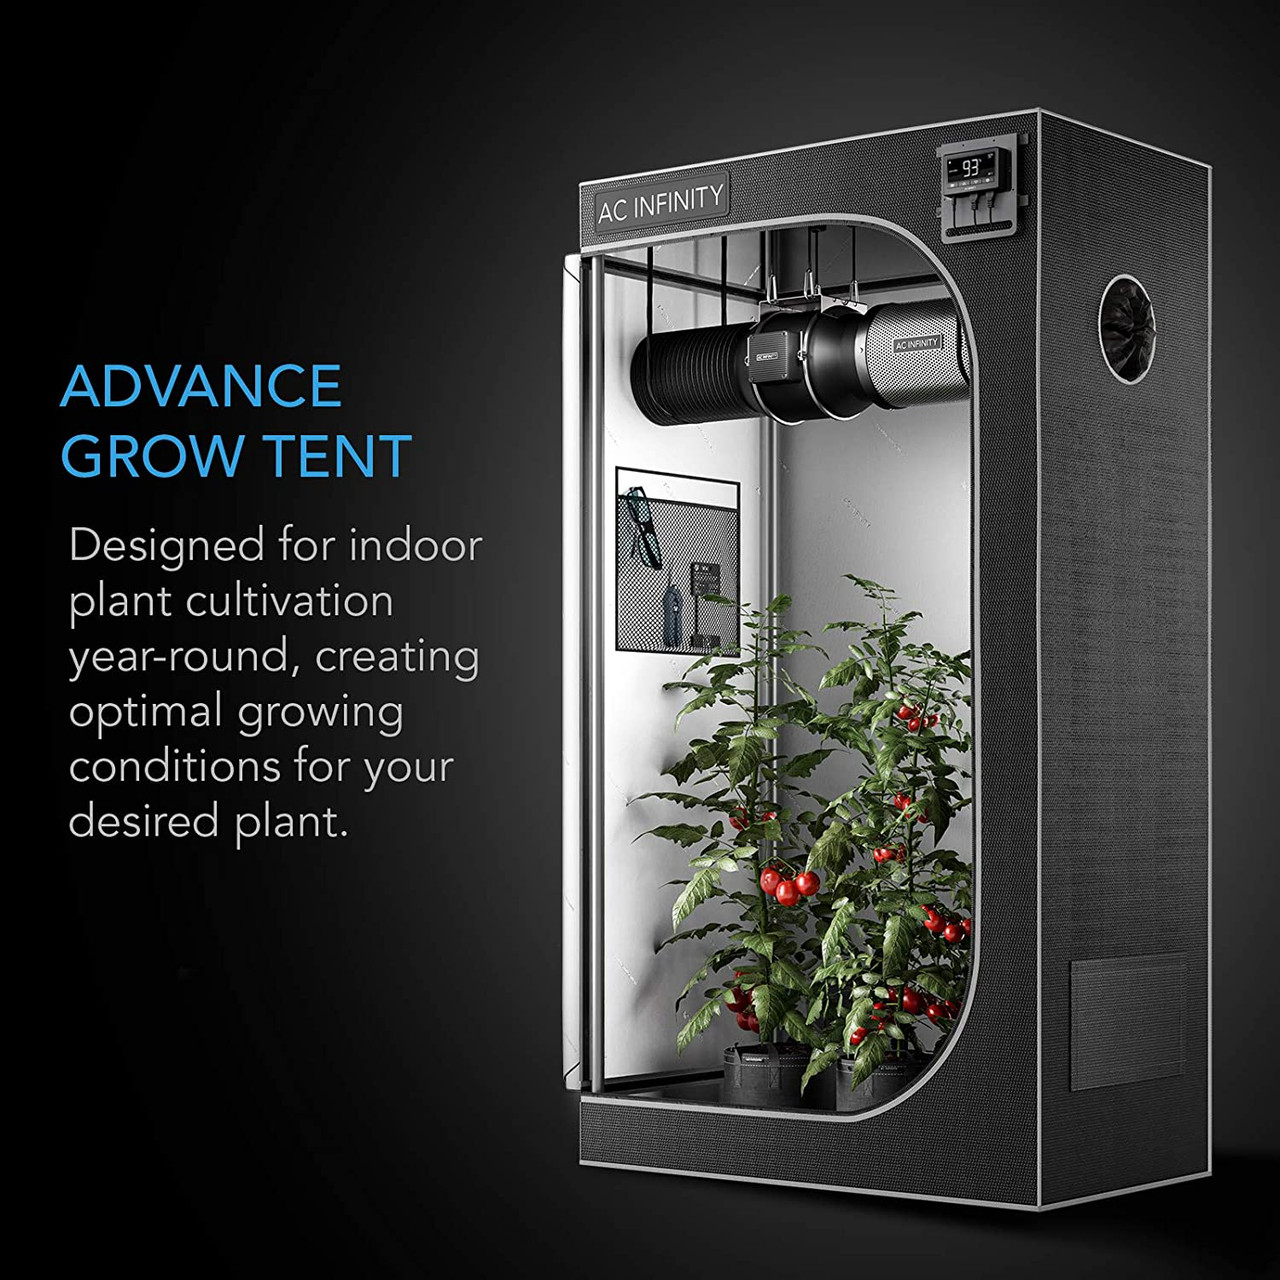 AC Infinity CLOUDLAB 866 Advance Grow Tent, 60”x60”x80” Thickest 1 in.  Poles, Highest Density 2000D Diamond Mylar Canvas, 5x5 for Hydroponics  Indoor